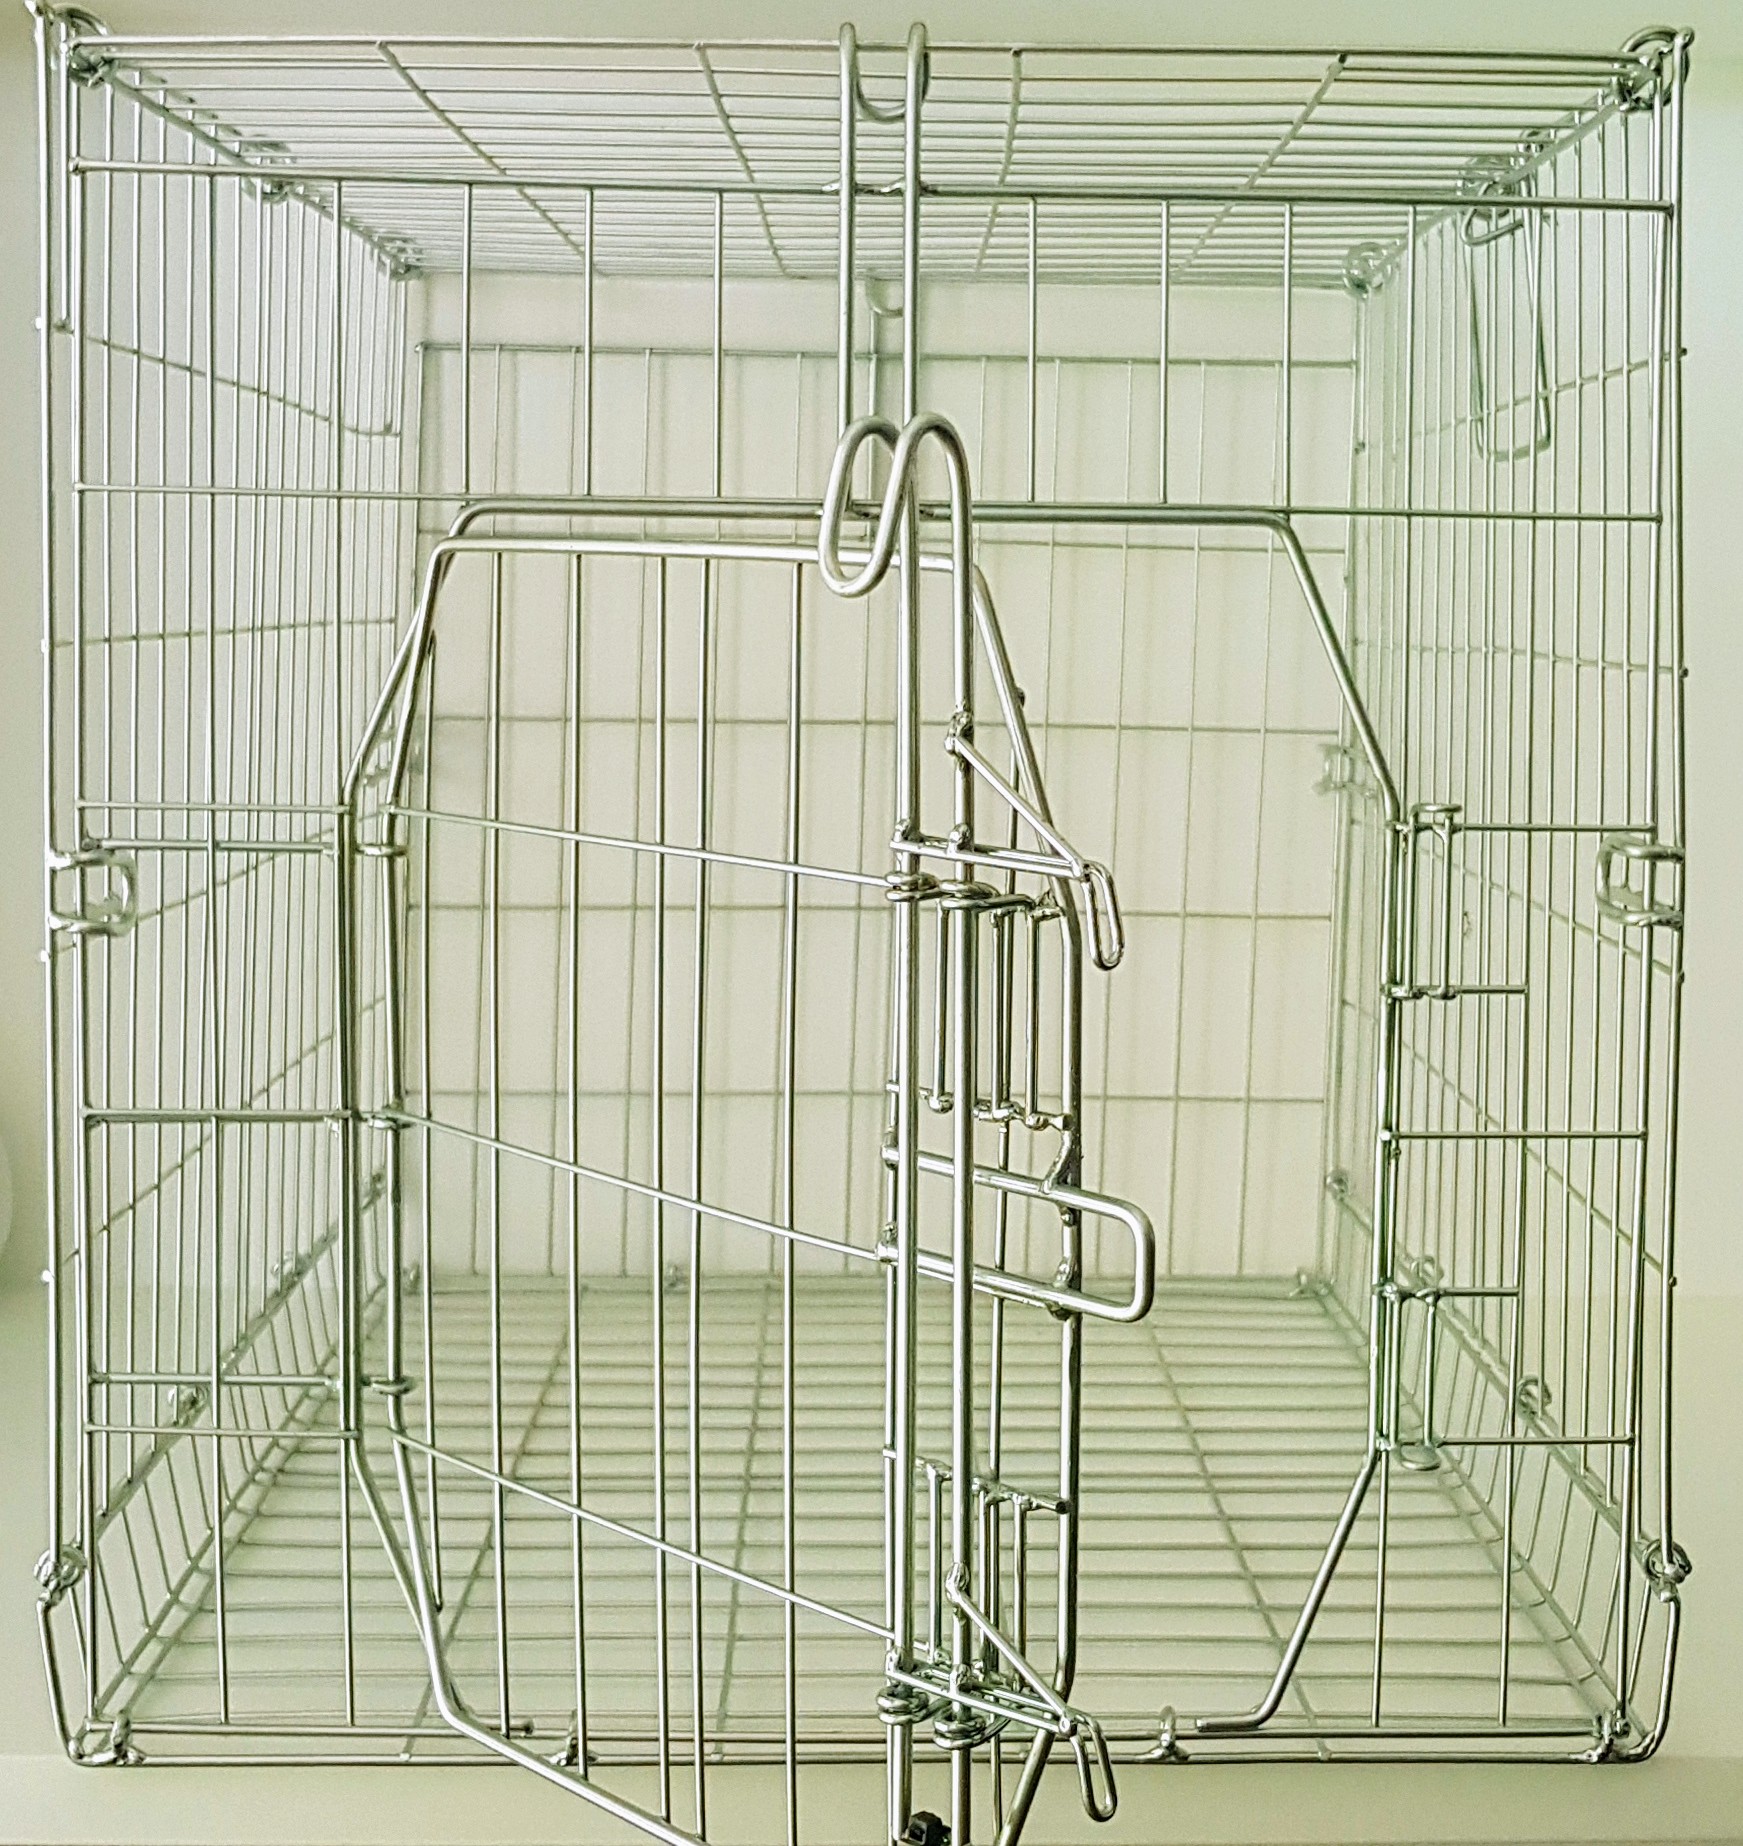 Our medium dog crates for sale or rent